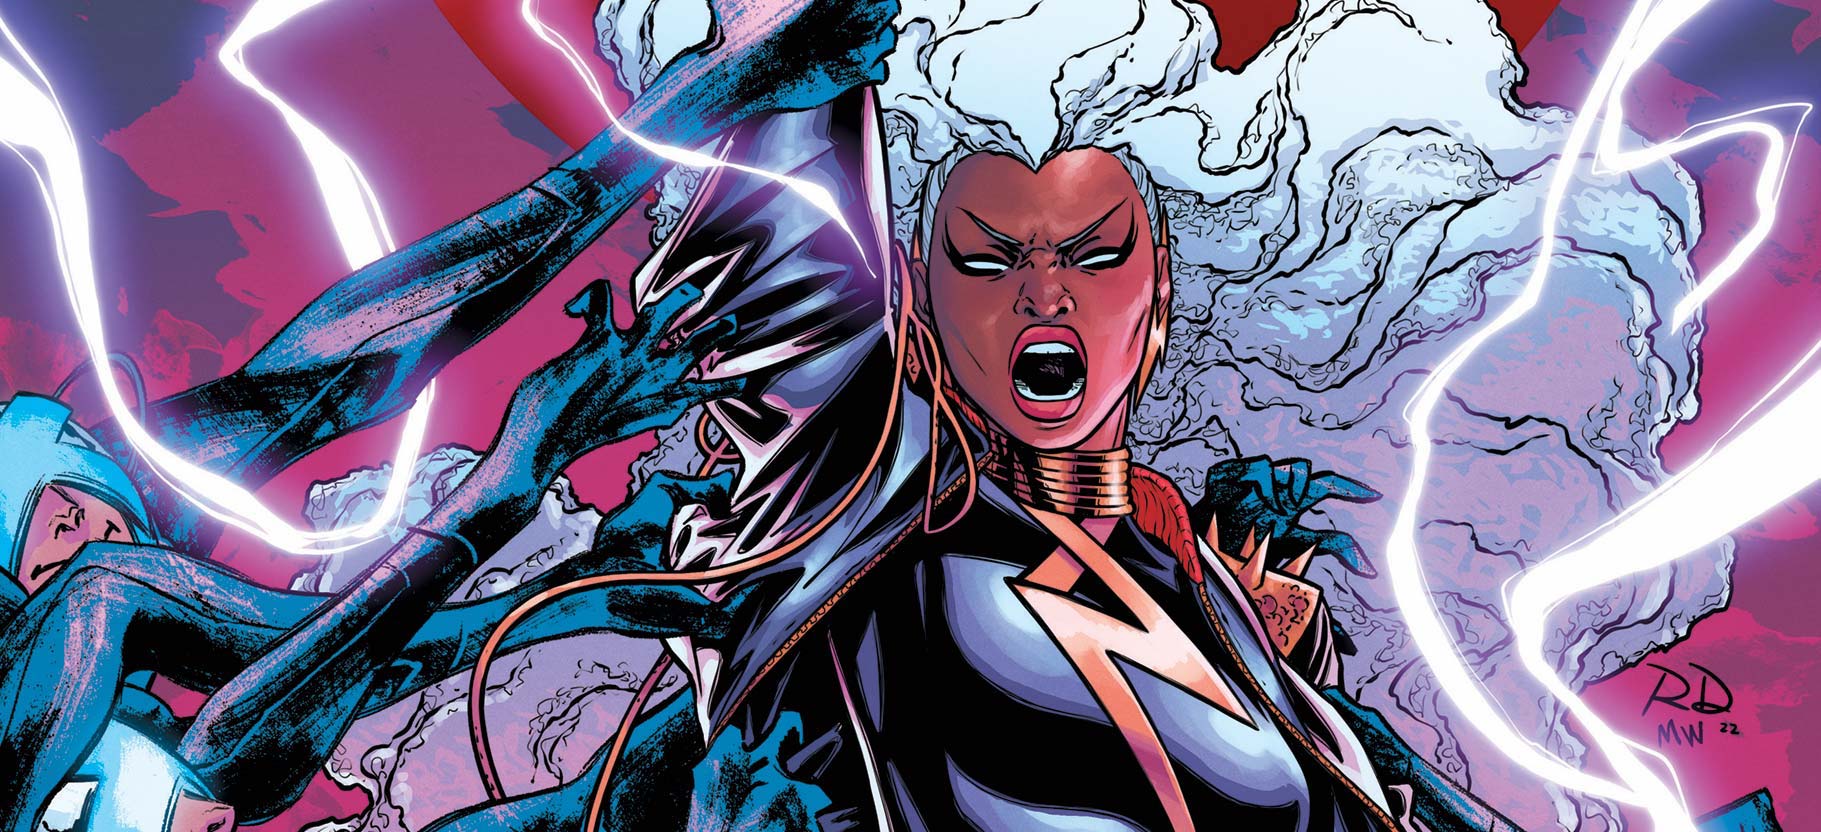 EXCLUSIVE Marvel Preview: X-Men Red #11